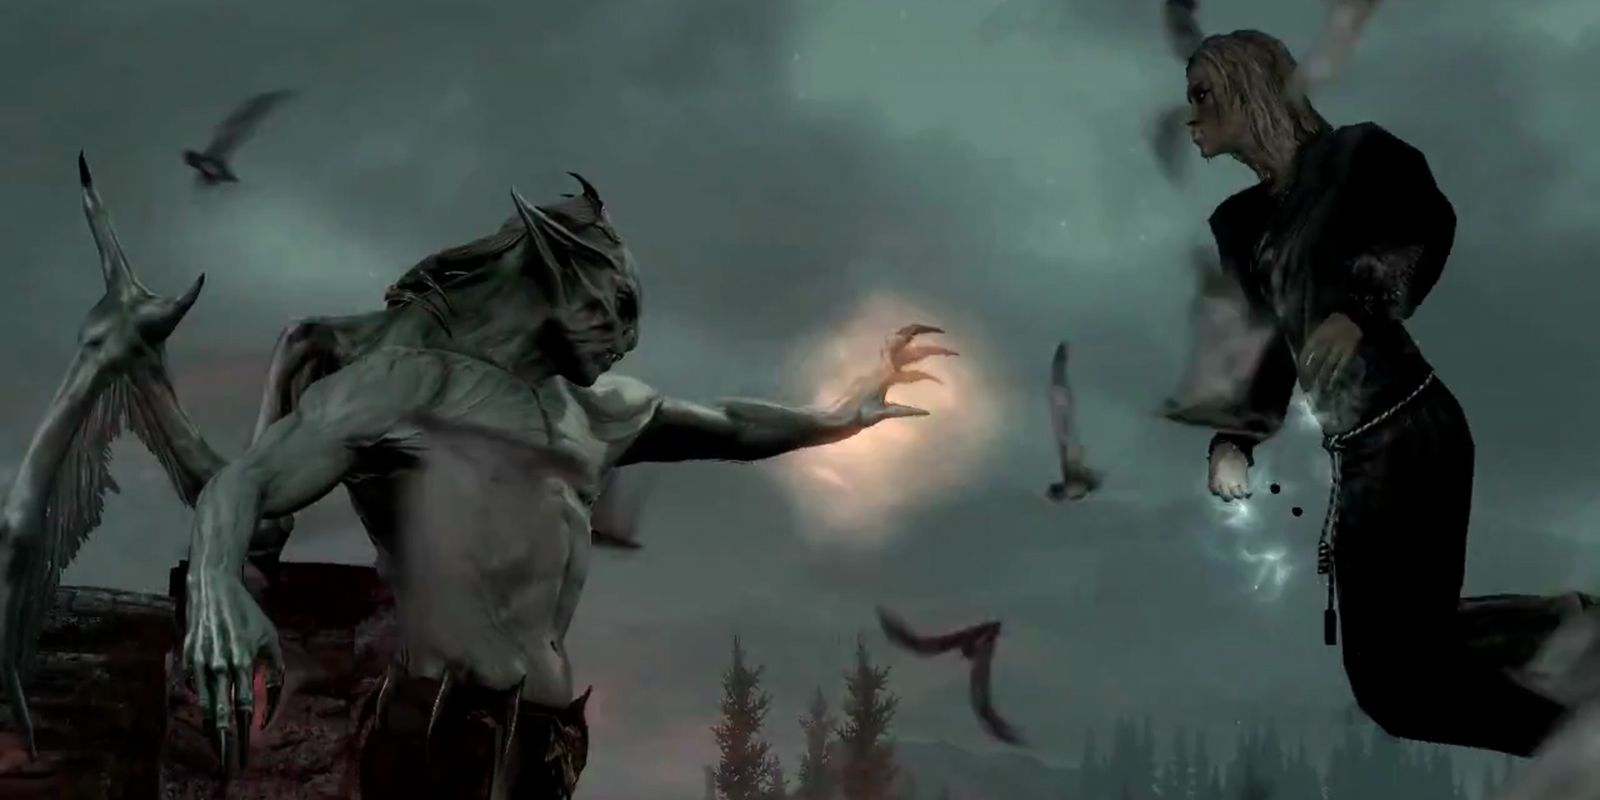 vampire lord fighting a person, skyrim